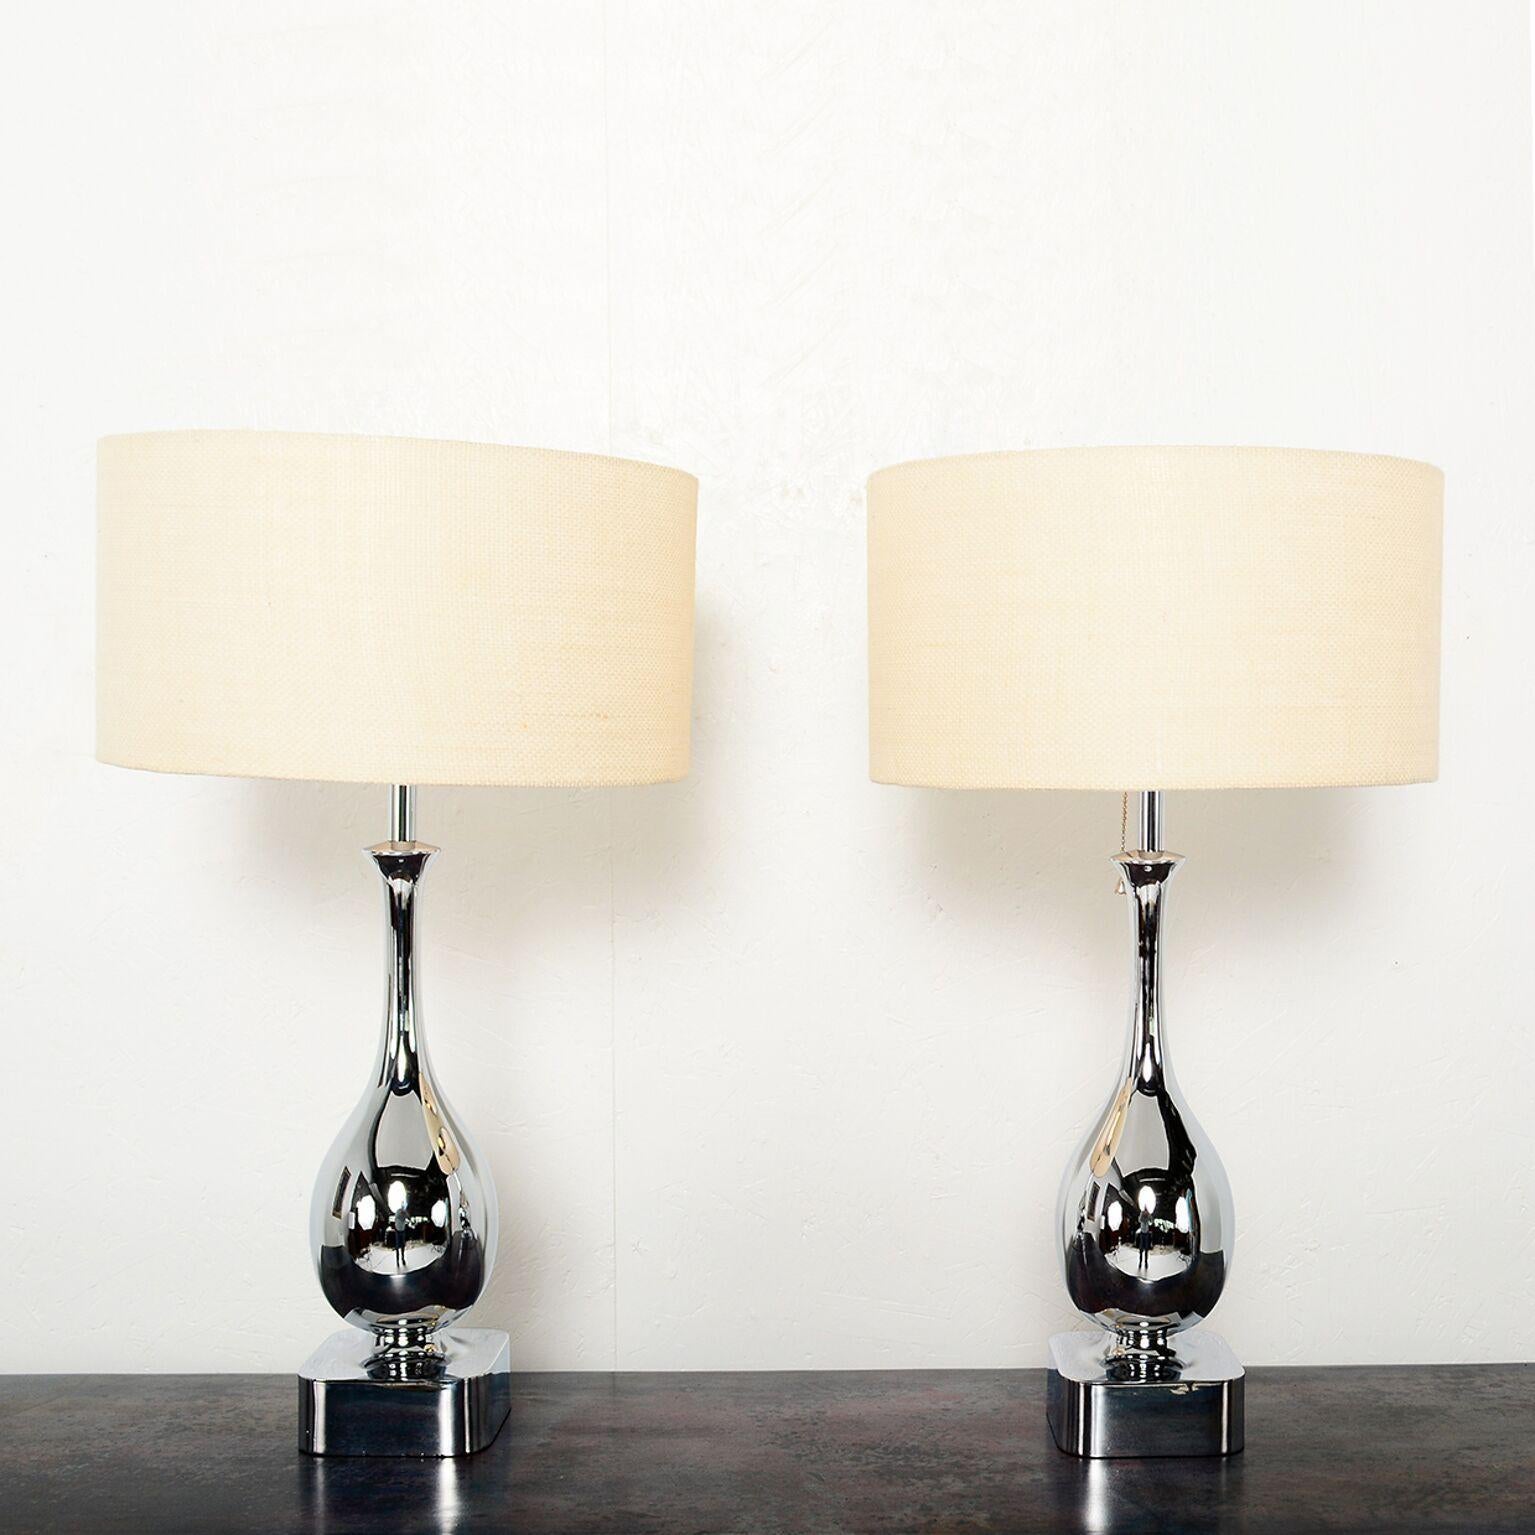 For your consideration: a pair of chrome-plated table lamps attributed to Laurel Lamp Co. by Maurizio Tempestini. New chrome-plated finish and rewired. Lamps in mint condition ready to go. Beautiful clean modern design. Lamp shades not included. For